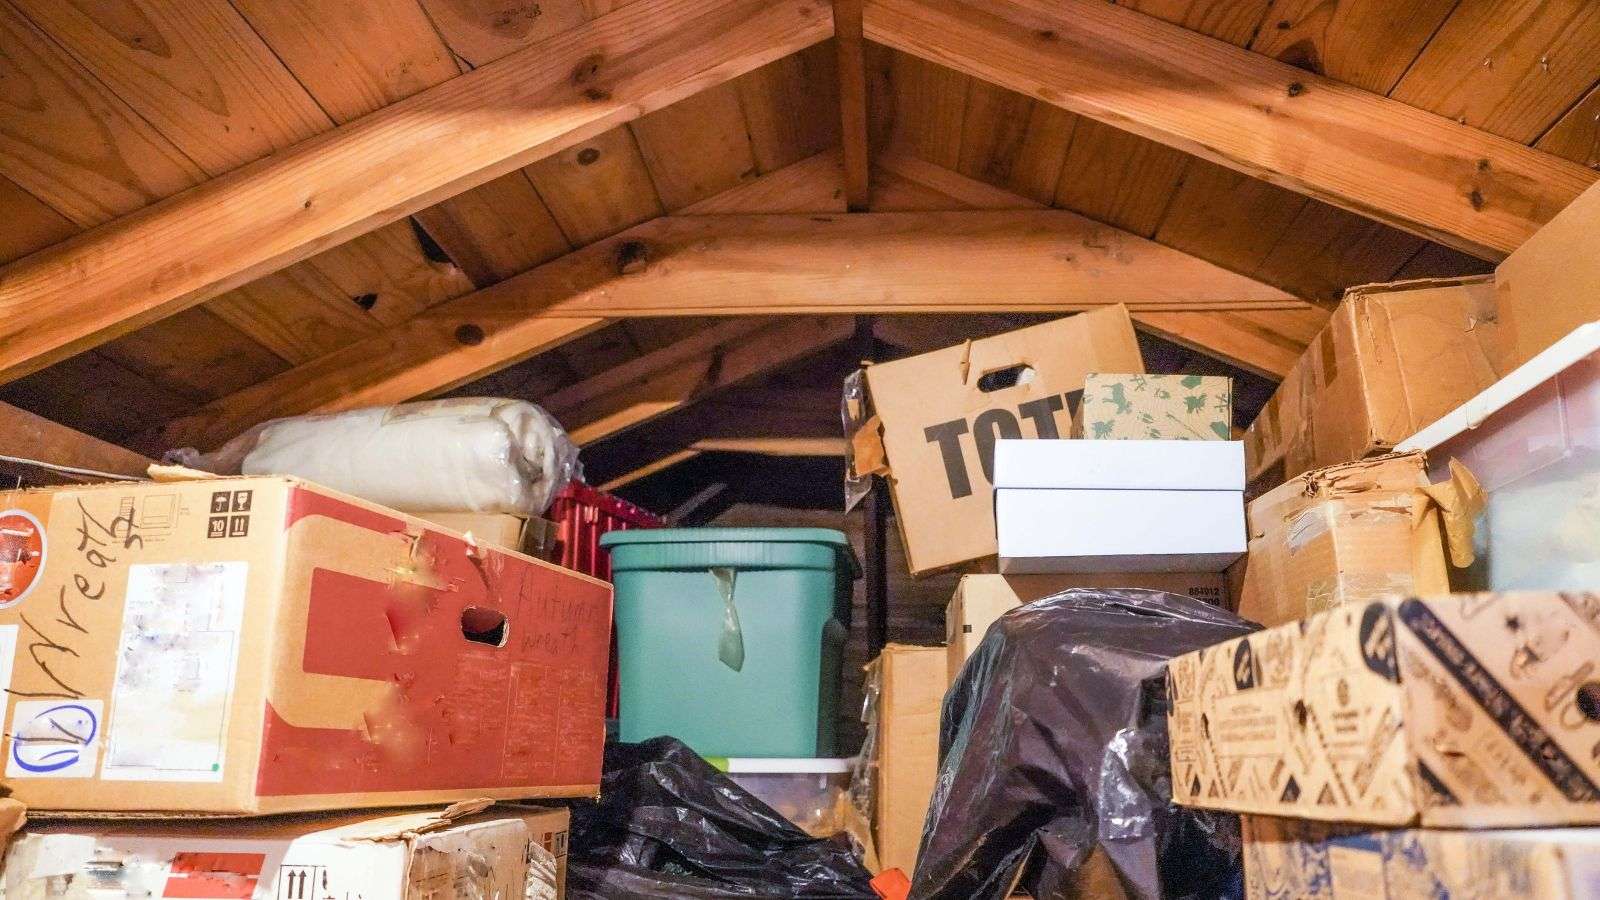 roach contamination in hard to reach attic corners - bighomeprojects.com